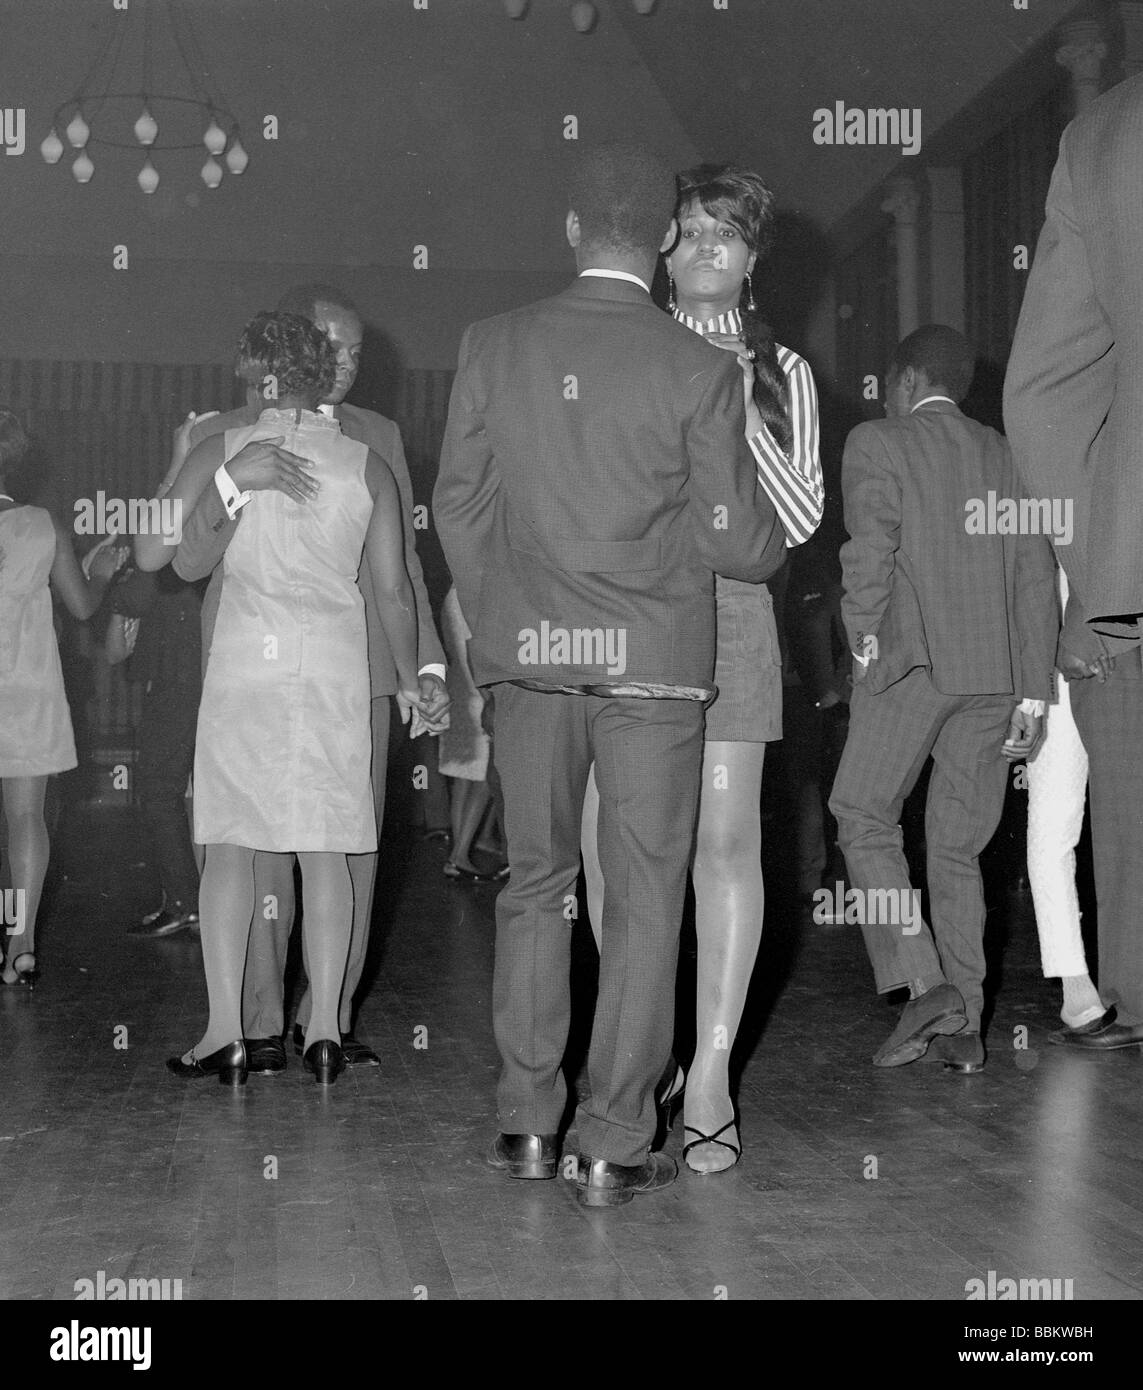 MINI SKIRT BALL at Ealing Town Hall in 1968 Stock Photo